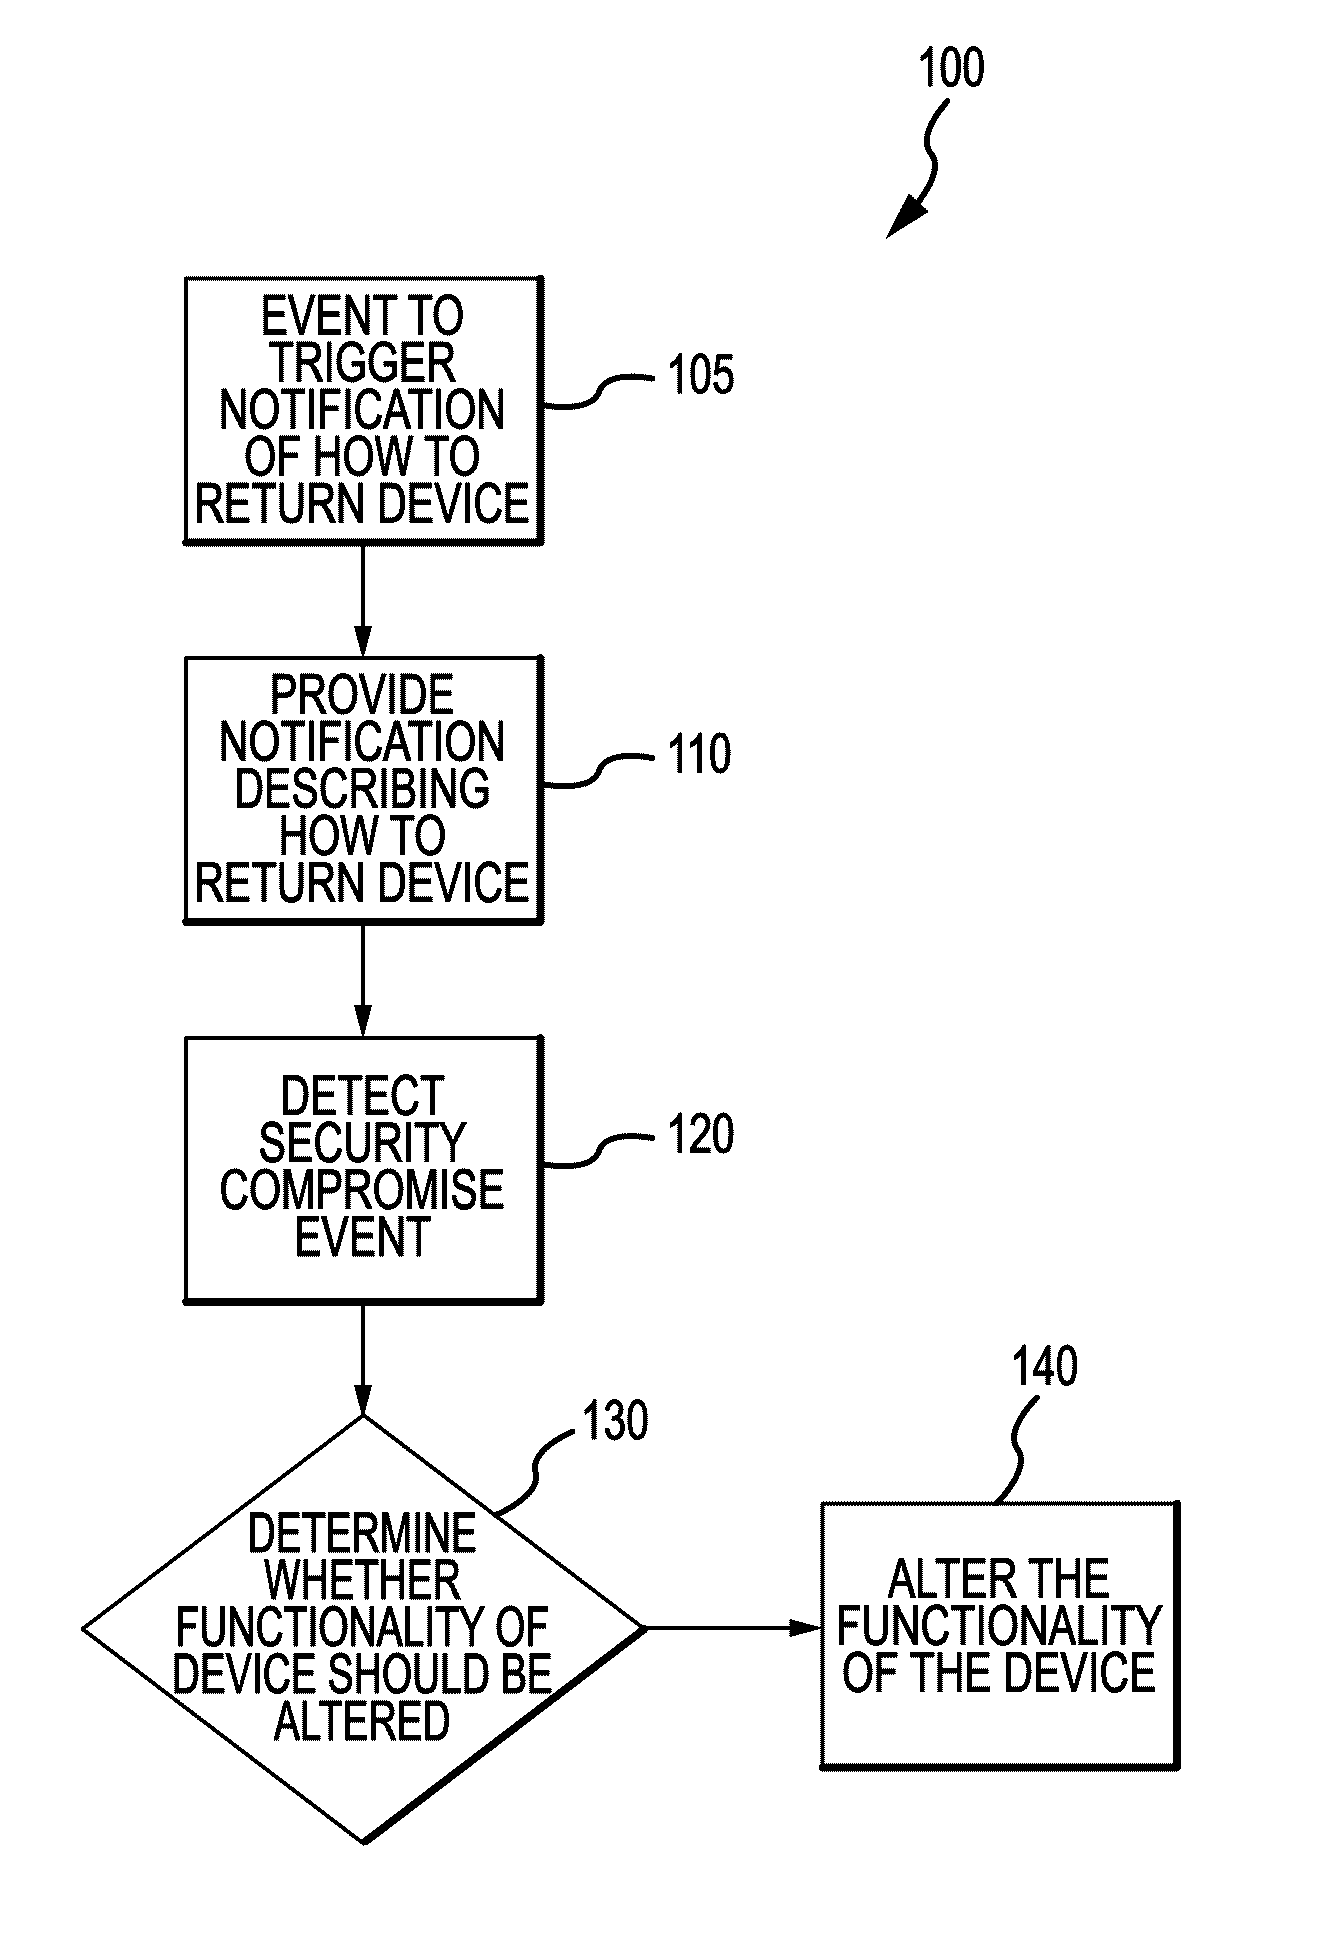 Systems and methods for dynamically assessing and mitigating risk of an insured entity